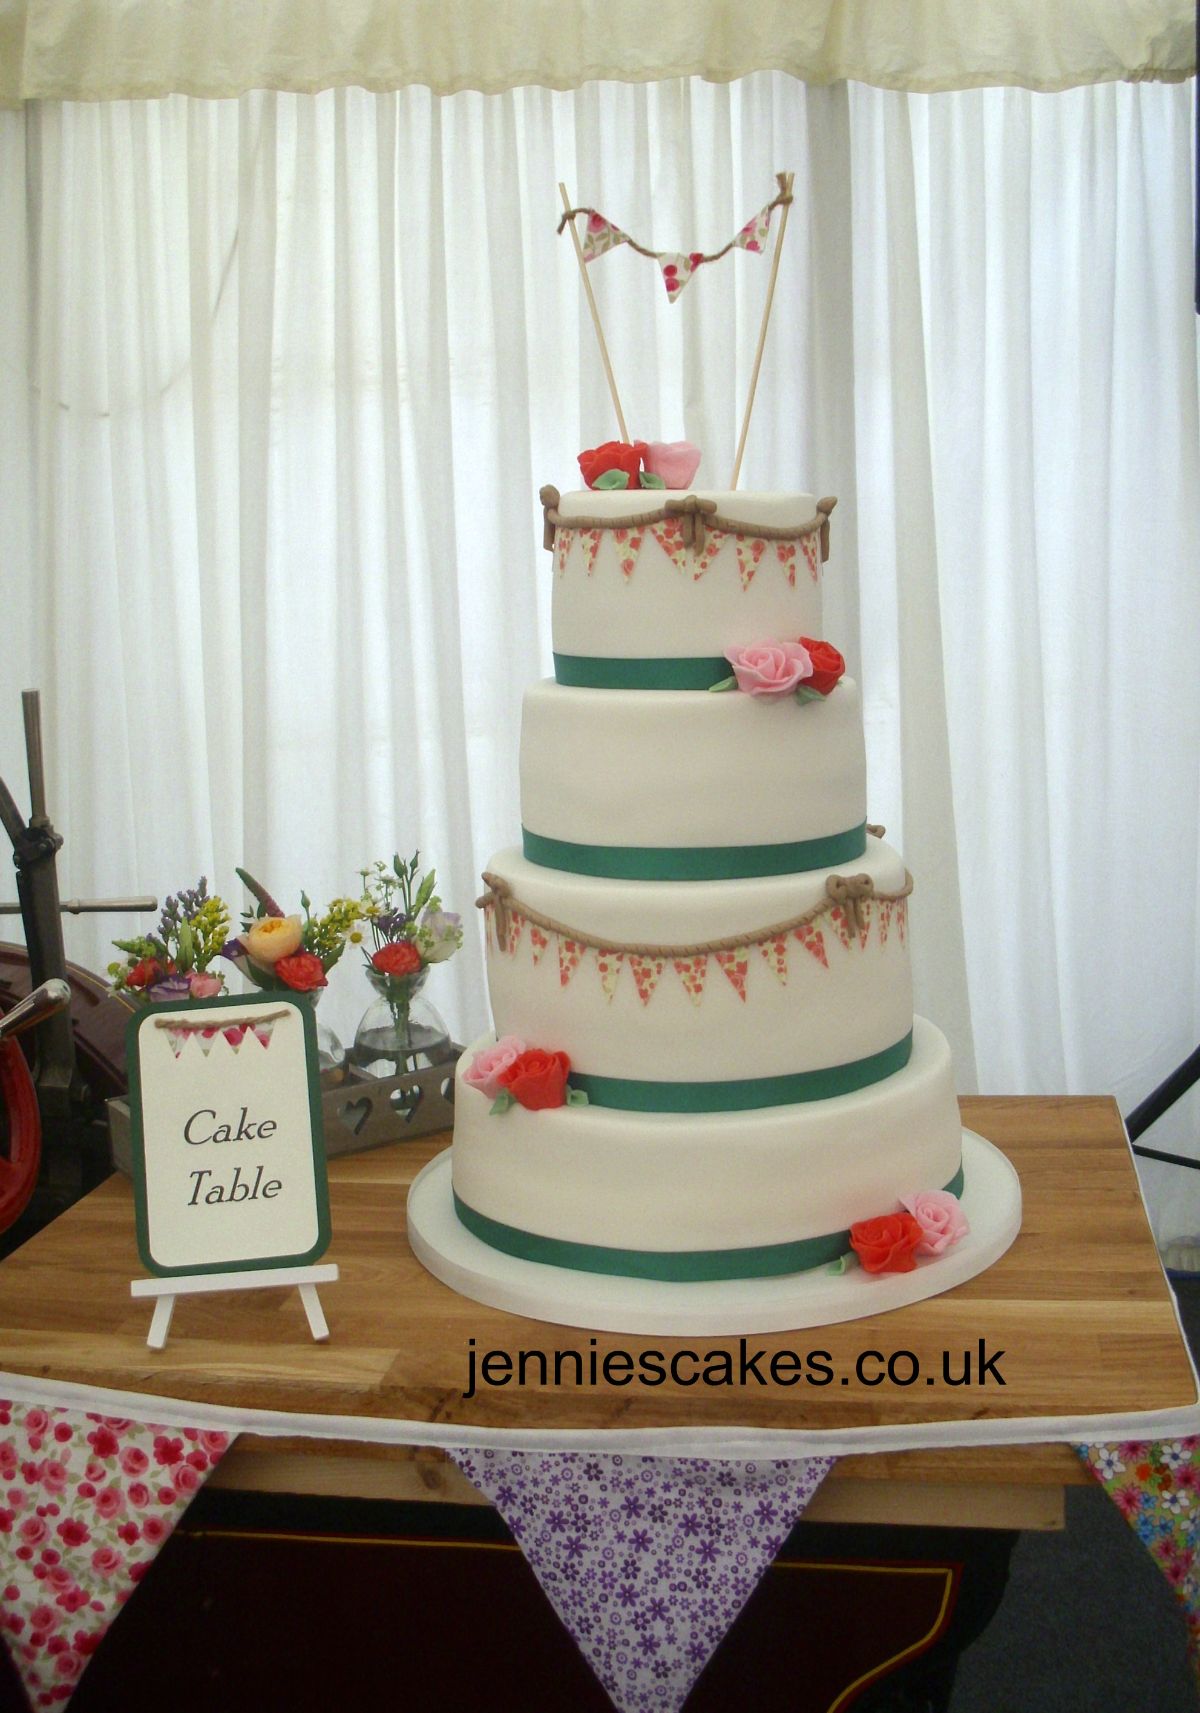 Jennie's cake's and catering-Image-58